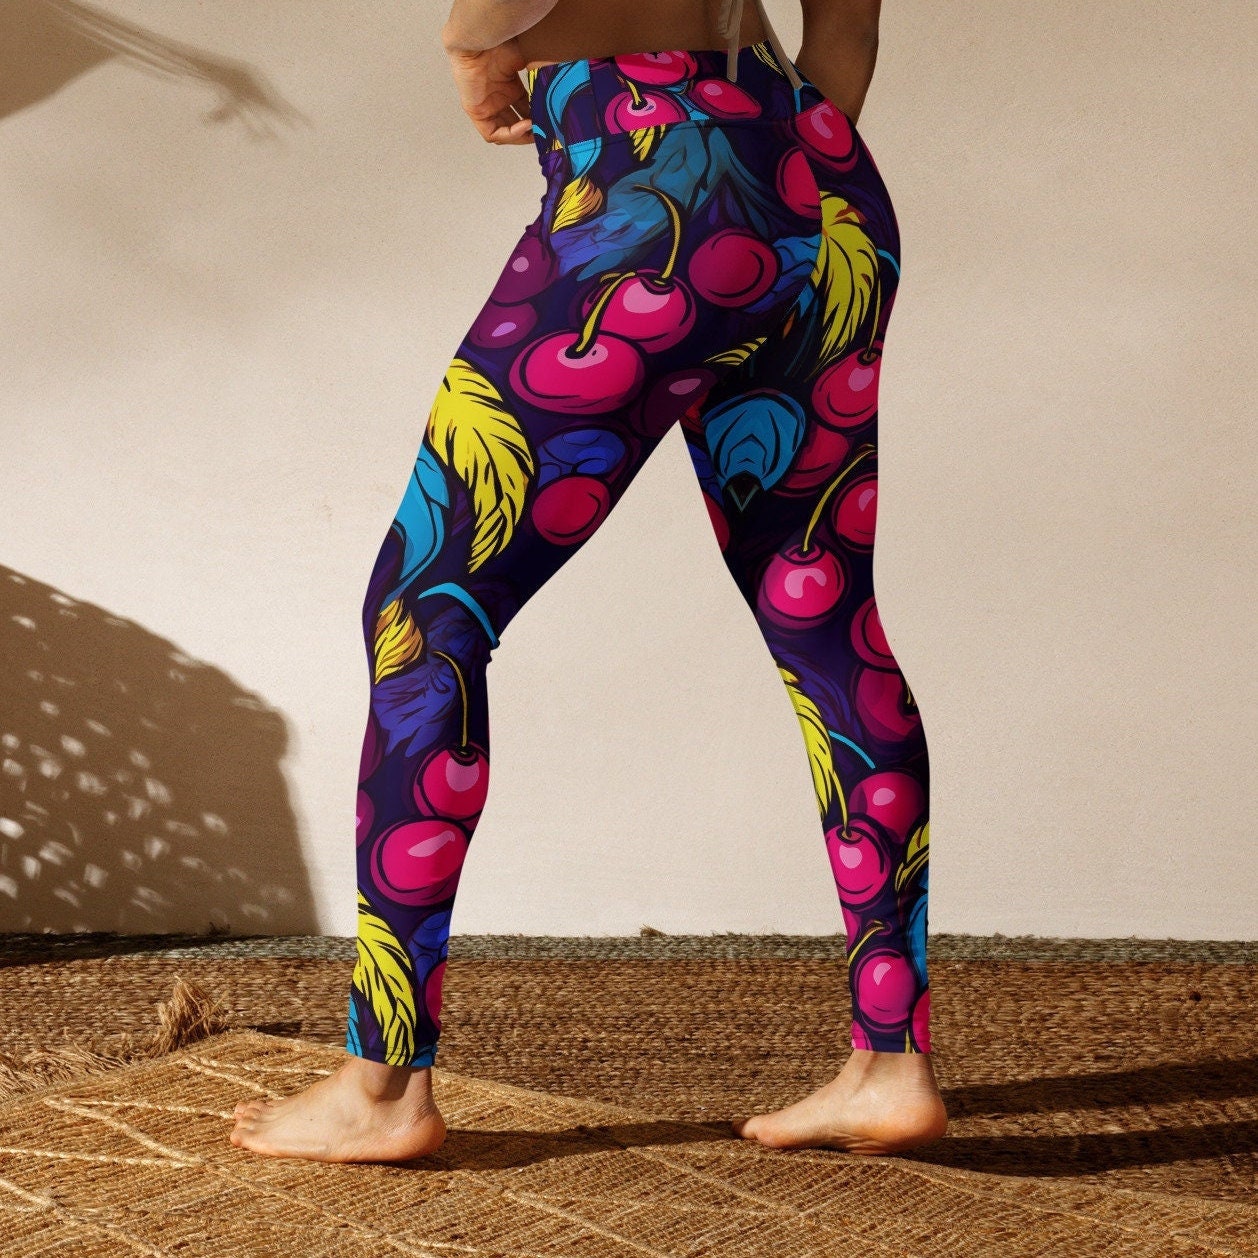 Cherry Blossom Recycled Leggings With Pockets All-over Cherry Blossoms Print  Leggings Sizes 2XS 6XL 